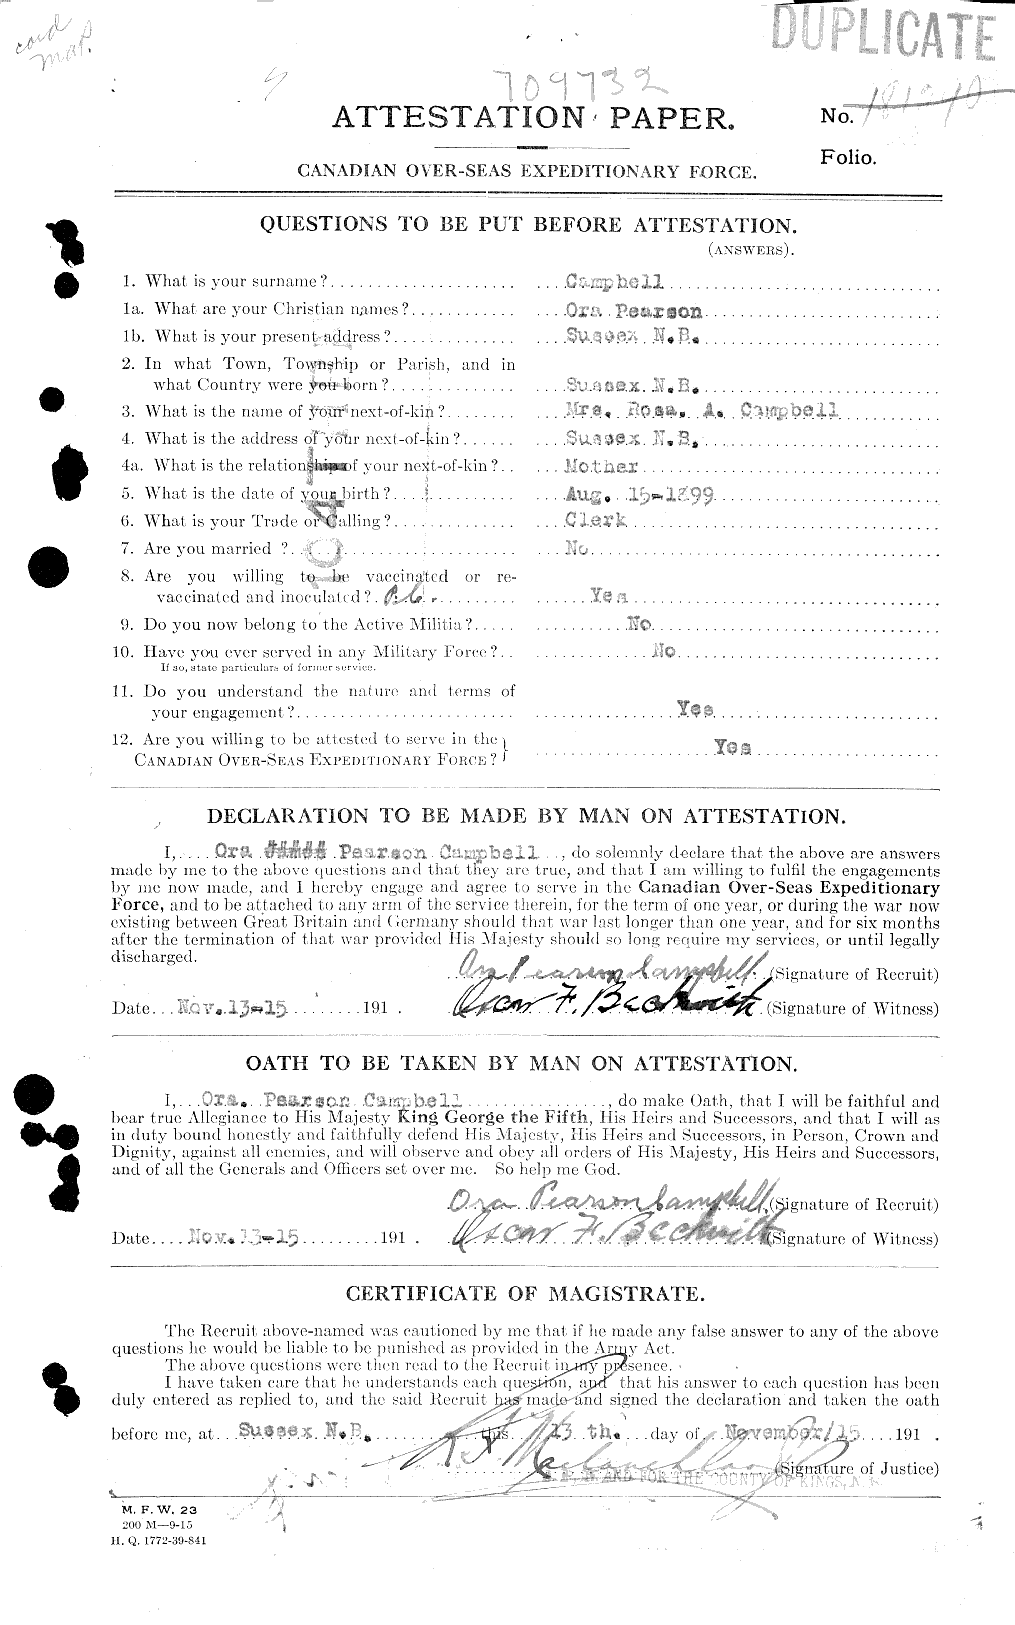 Personnel Records of the First World War - CEF 006983a